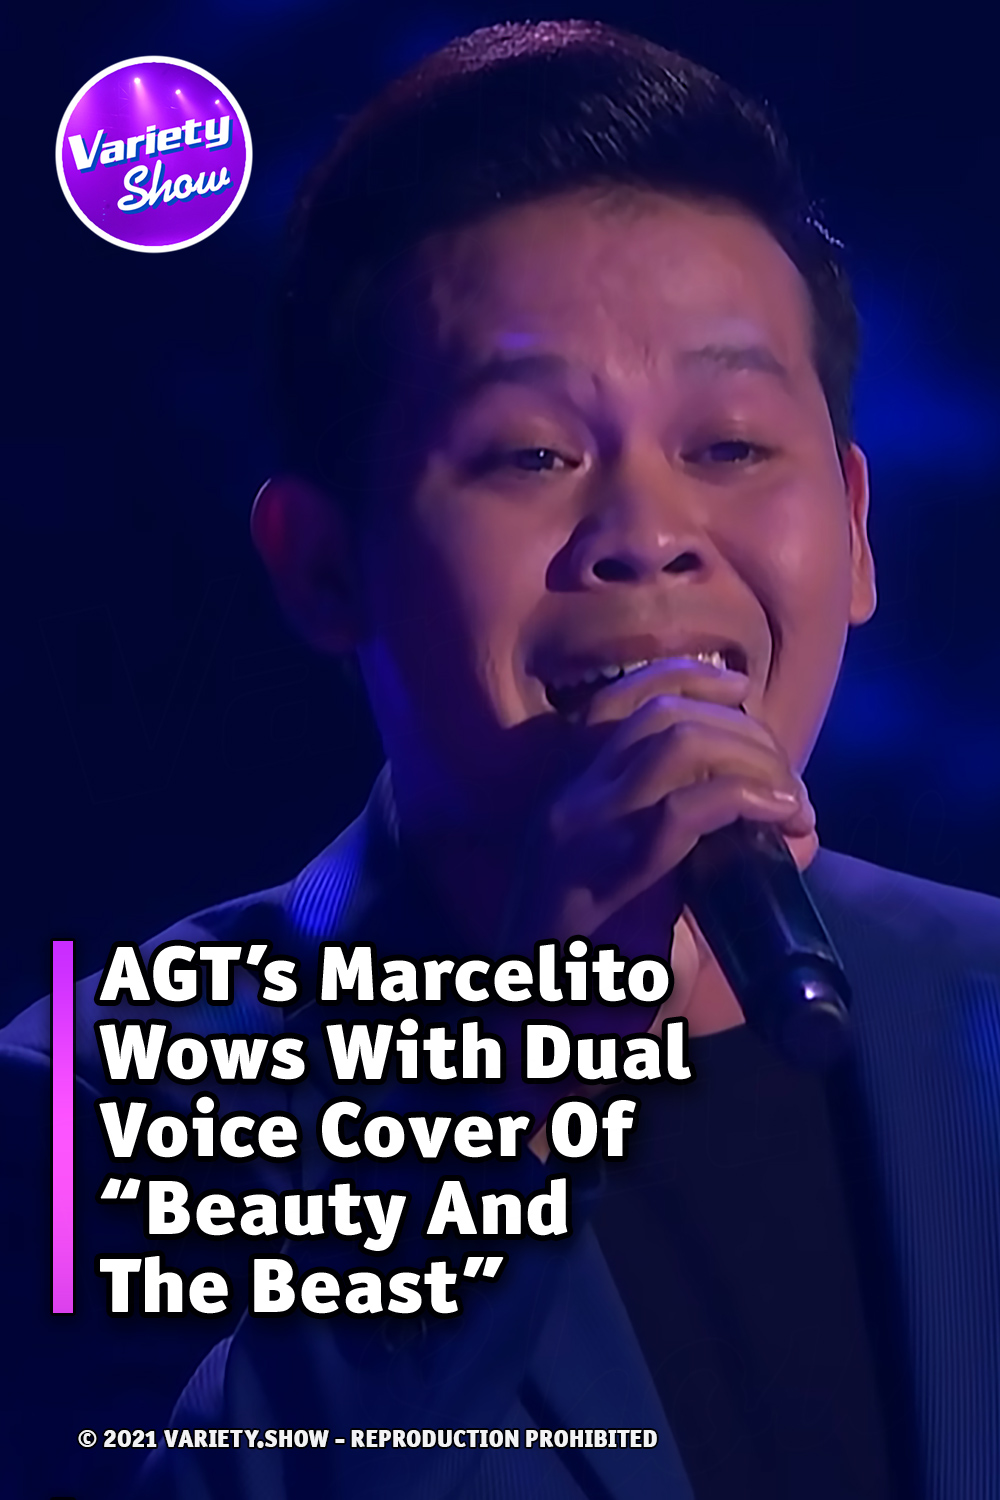 AGT’s Marcelito Wows With Dual Voice Cover Of “Beauty And The Beast”